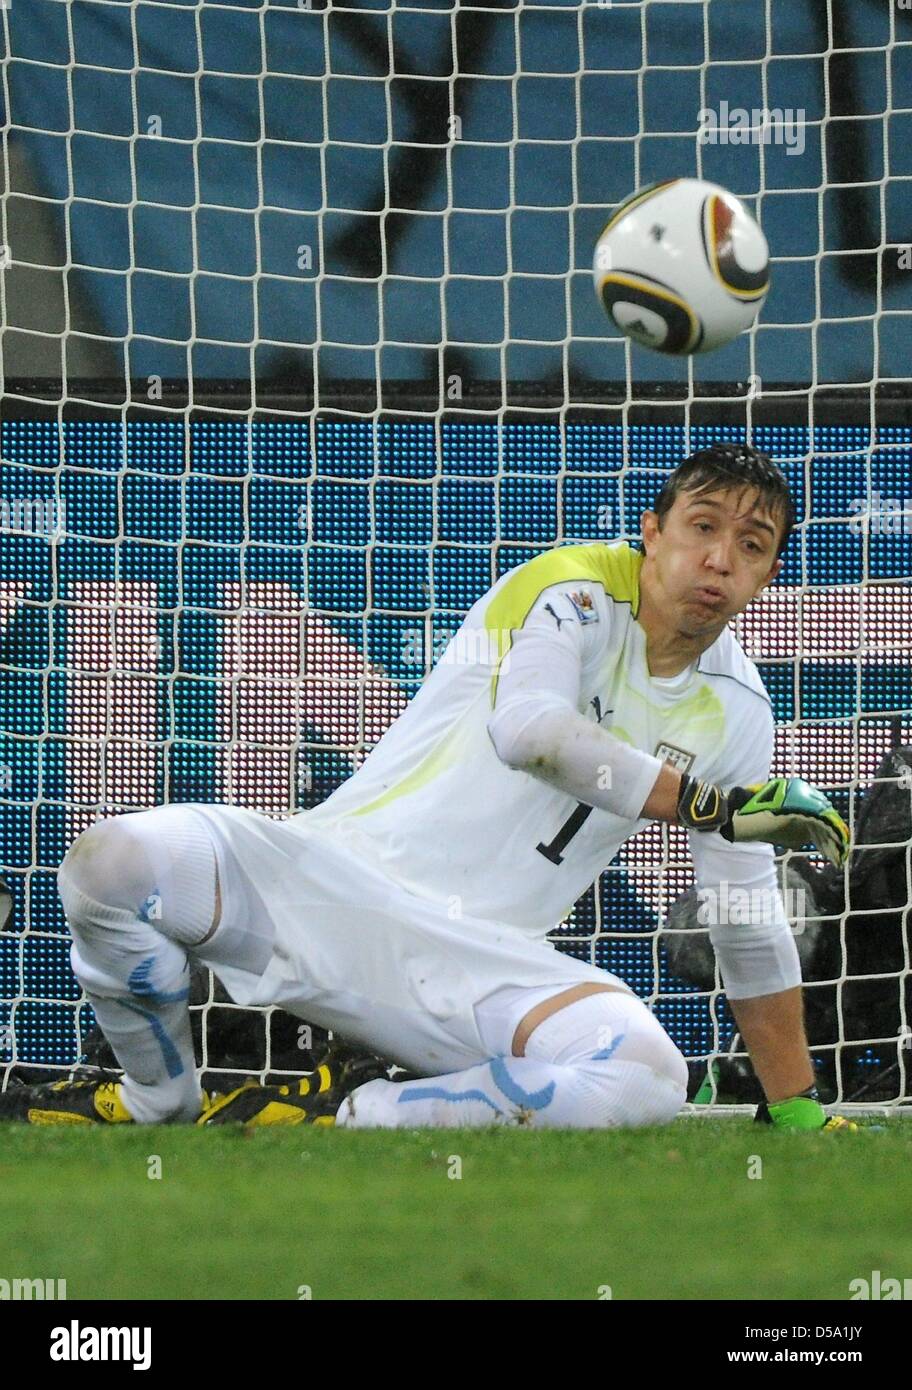 Uruguay's goalkeeper Fernando Muslera in action during the 2010 FIFA World Cup third place match between Uruguay and Germany at the Nelson Mandela Bay Stadium in Port Elizabeth, South Africa 10 July 2010. Germany won 3:2. Photo: Marcus Brandt dpa - Please refer to http://dpaq.de/FIFA-WM2010-TC Stock Photo